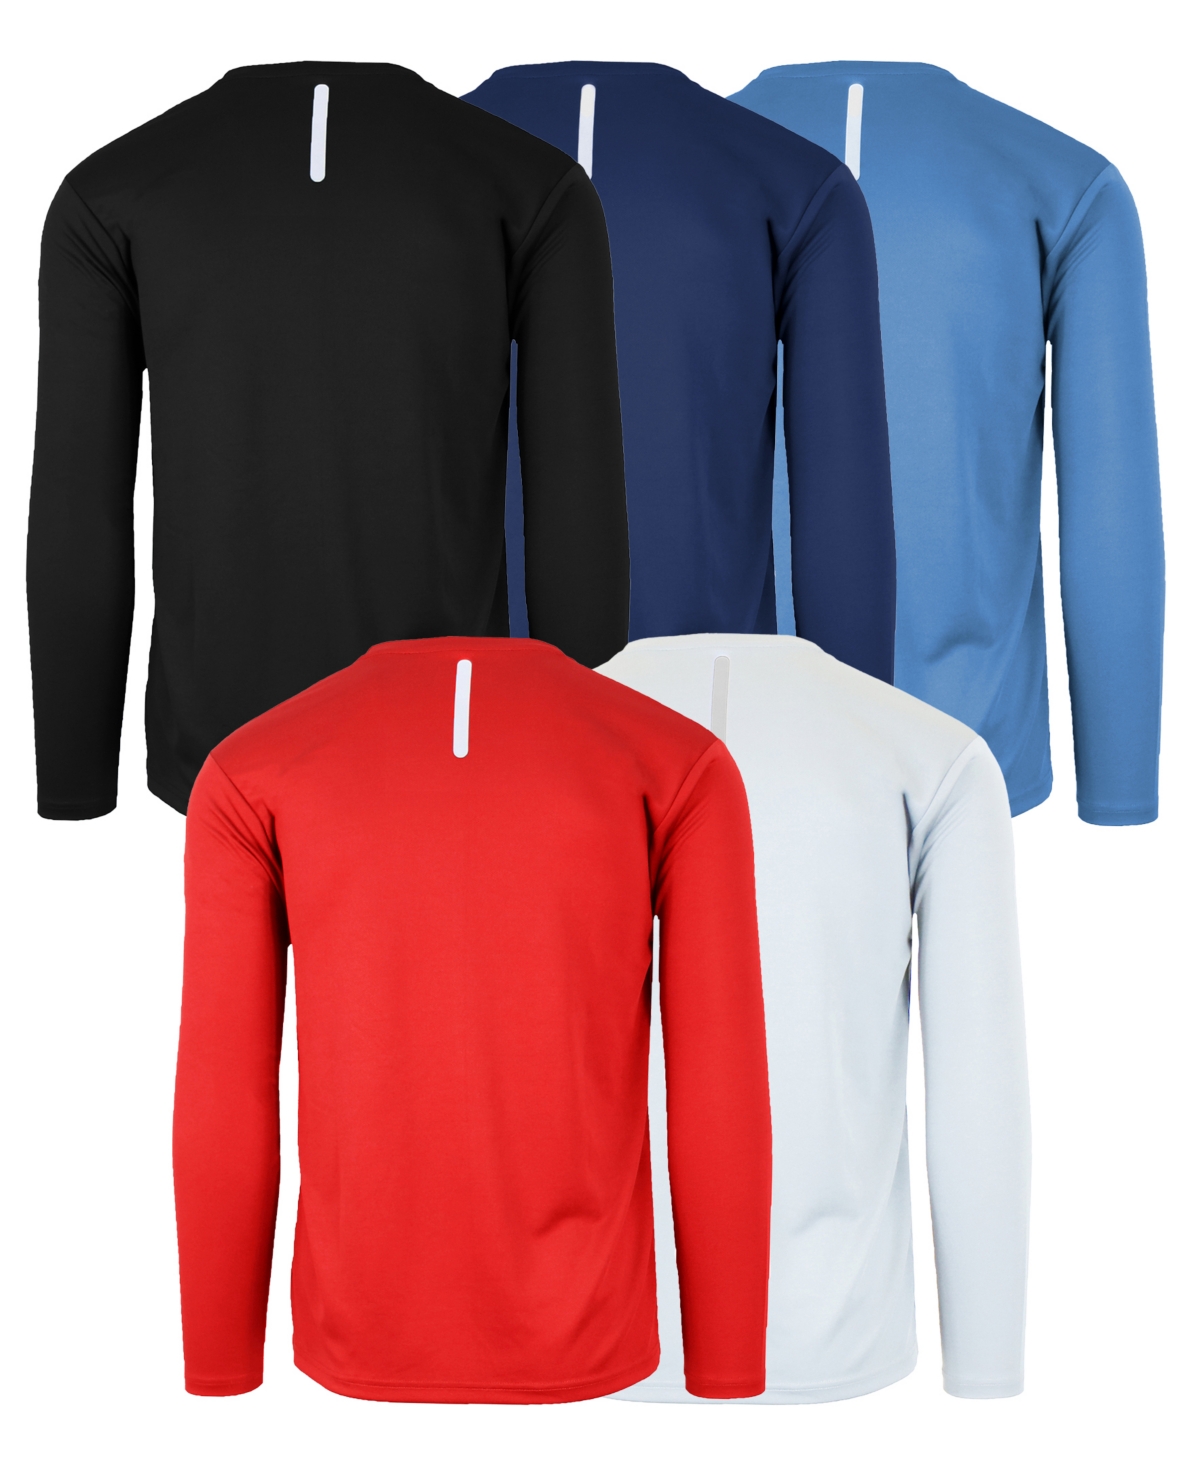 Shop Galaxy By Harvic Men's Long Sleeve Moisture-wicking Performance Crew Neck Tee -5 Pack In Charcoal Multi